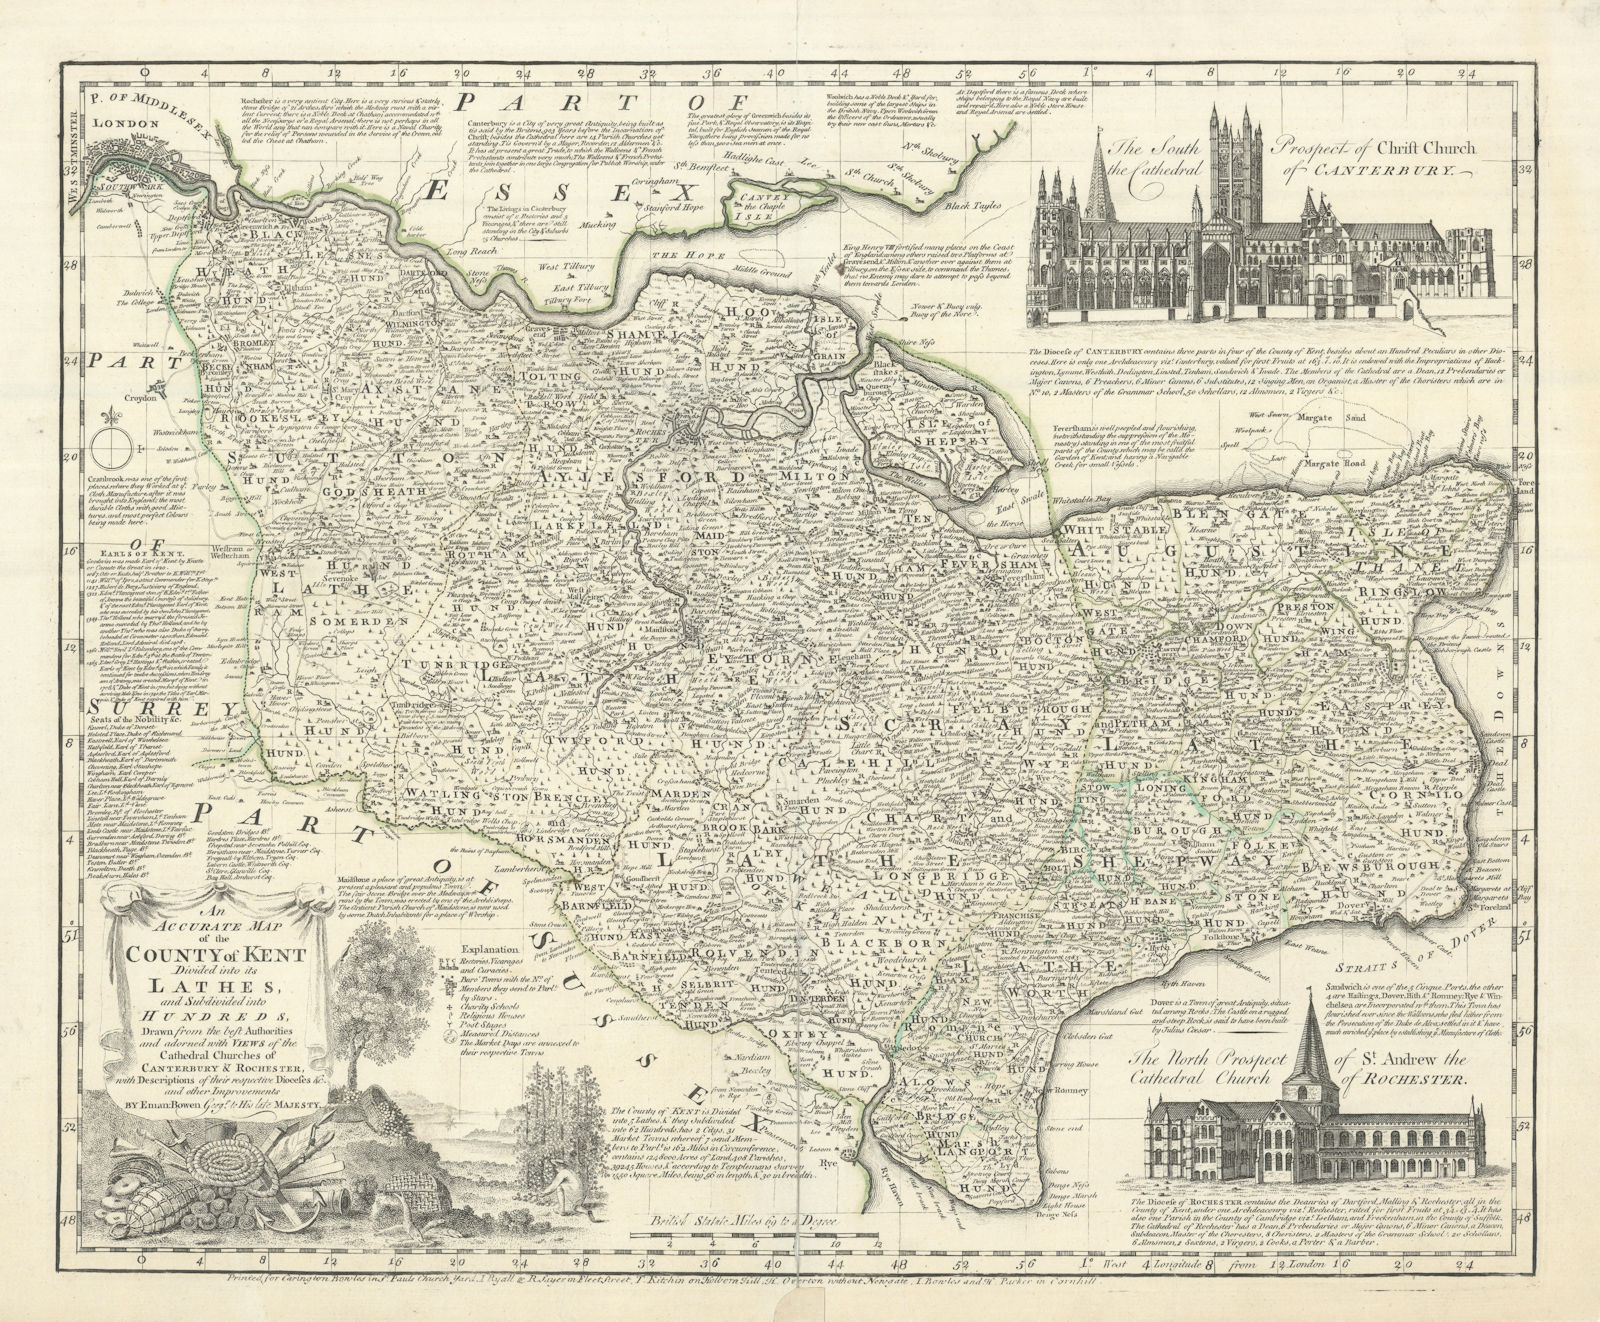 An Accurate Map of the County of Kent Divided into its Lathes… by E Bowen 1762